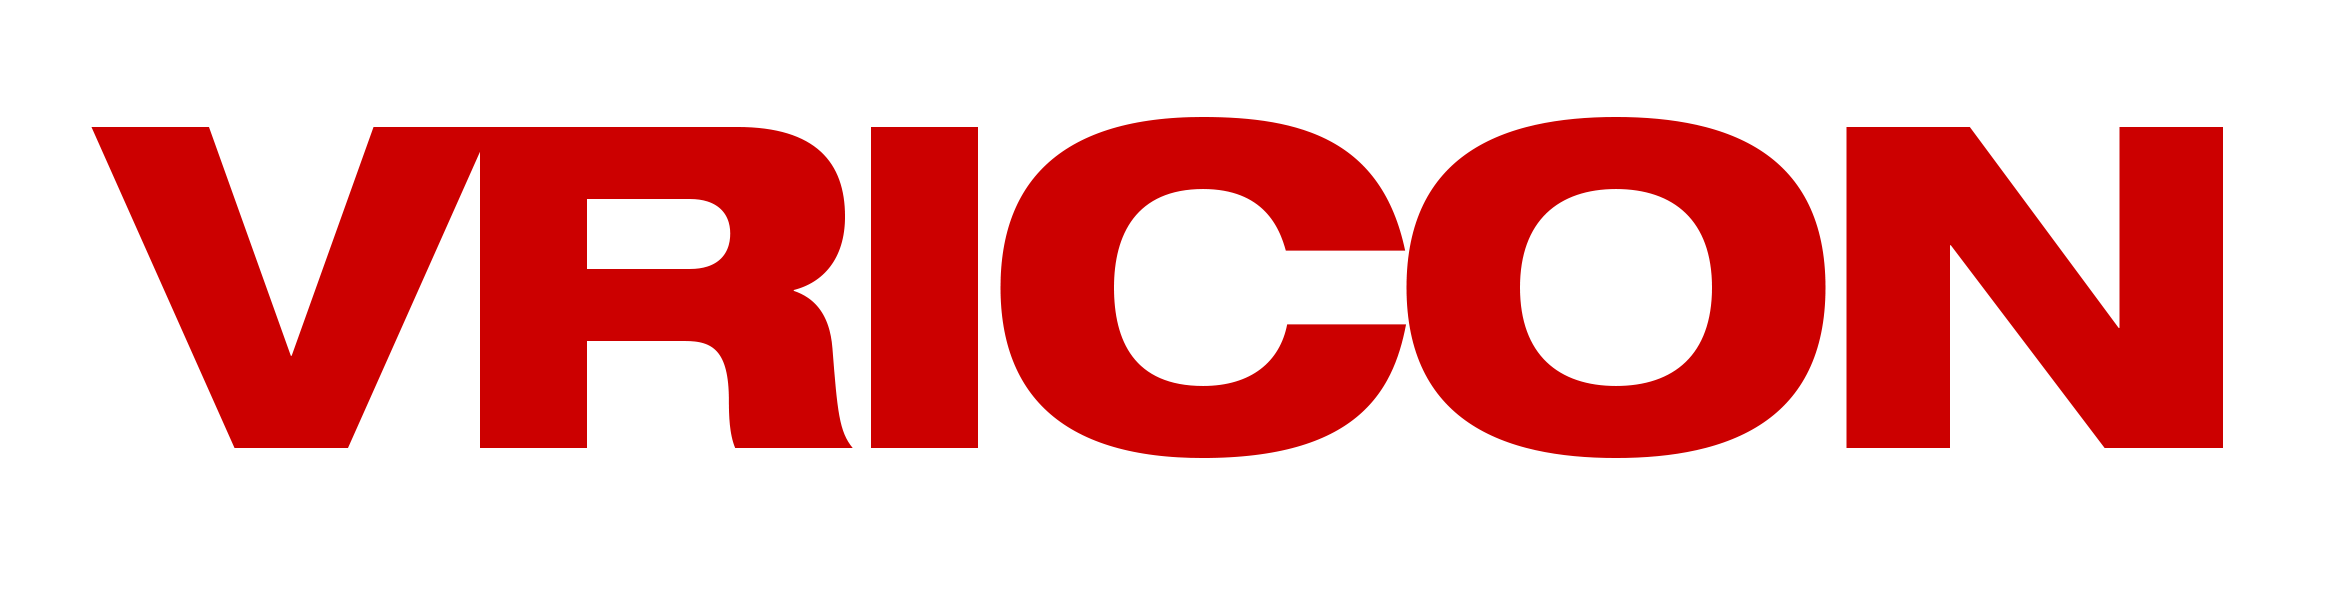 0_int_Vricon_logo1.PNG